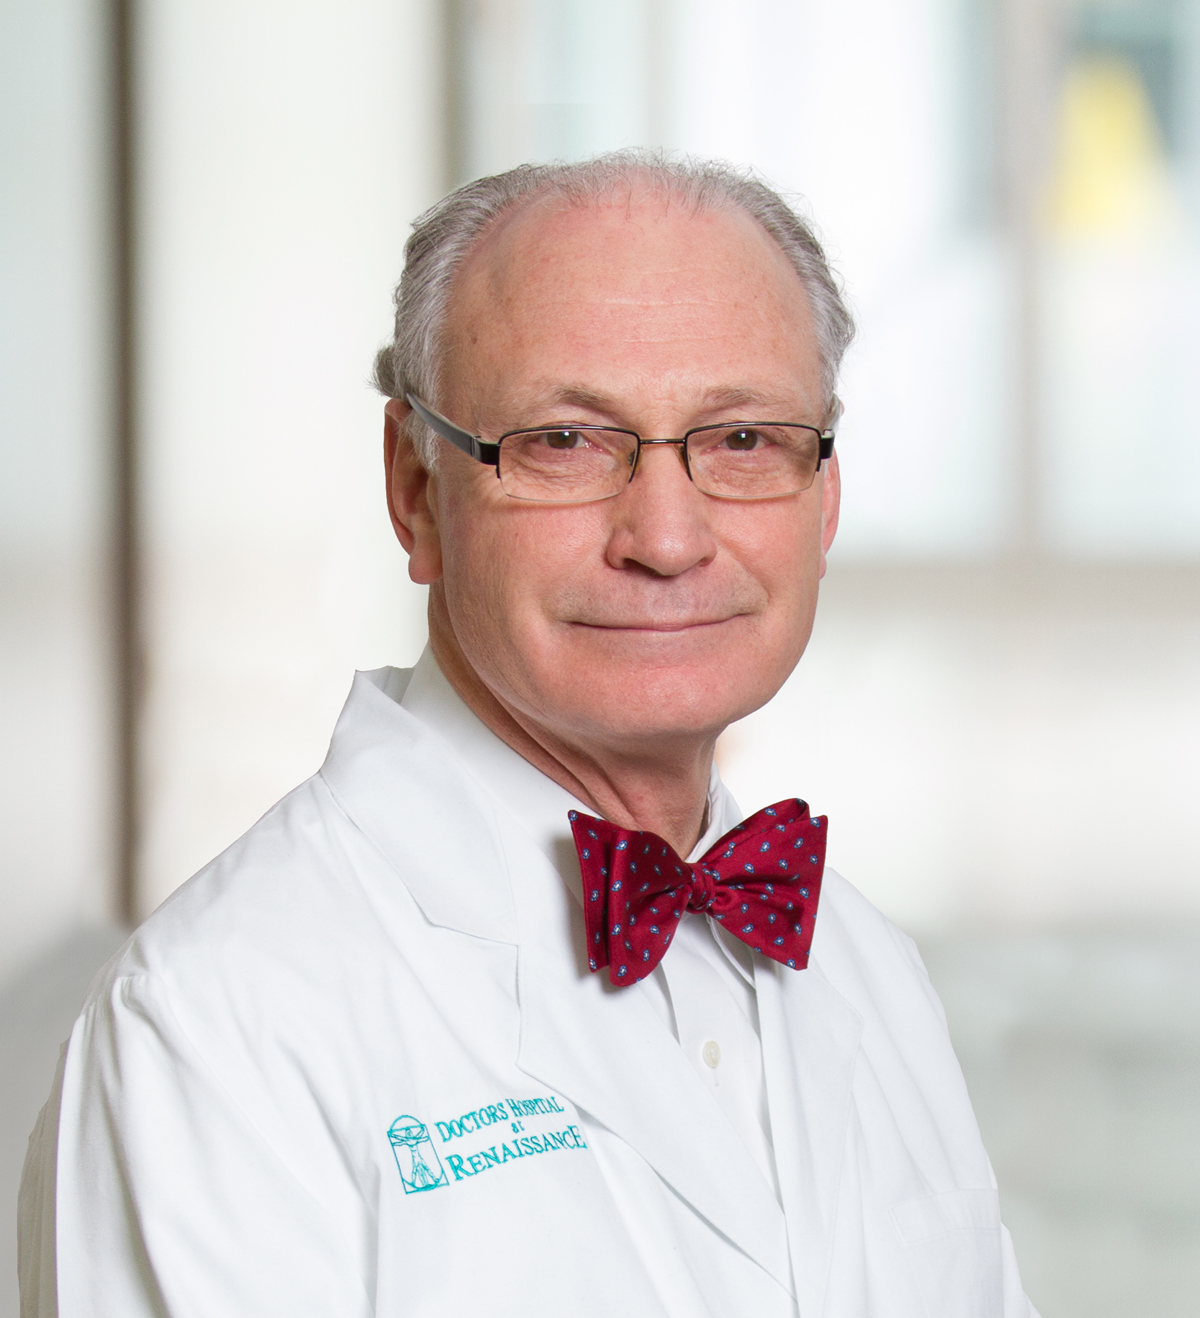 Co-Author, Obesity Disease Expert and leading Bariatric Surgeon, R. Armor Forse, MD, PhD, who conducted Nick's gastric bypass procedure and saved his life.